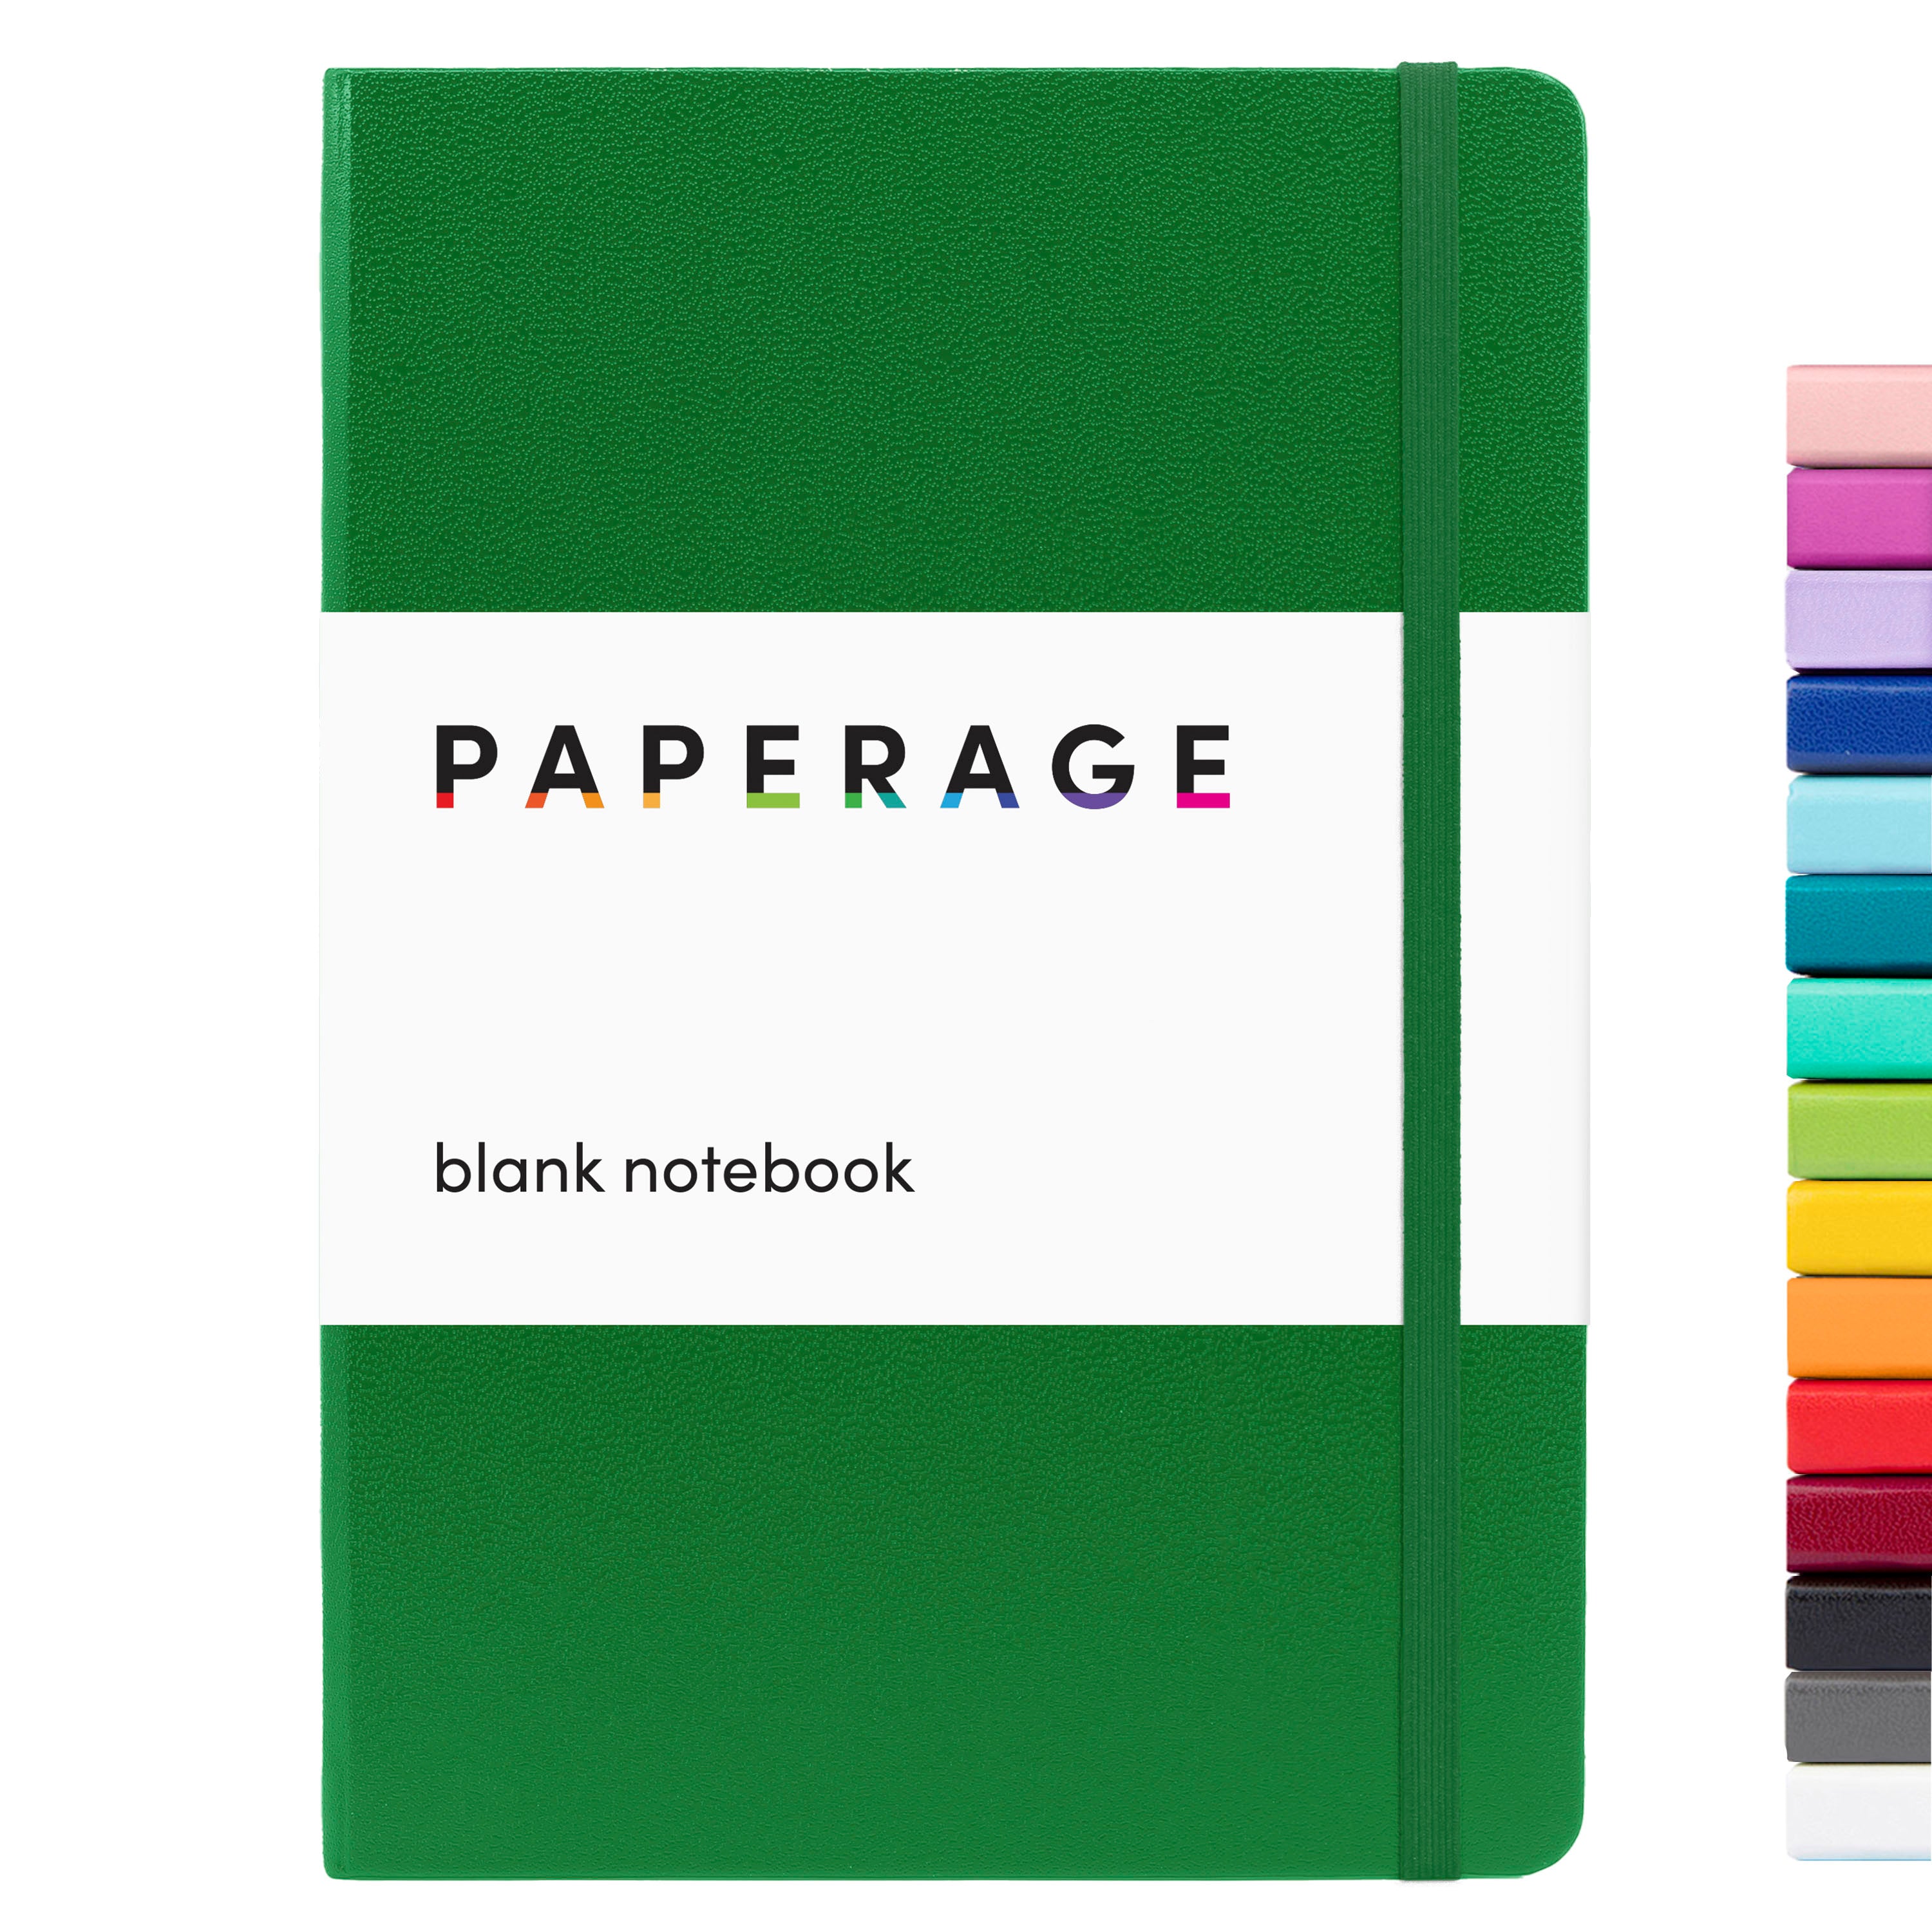  Arteza Journal Blank Page Notebooks, Pack of 2, 6 x 8 inches,  96 Sheets, Hunter Green and Saddle, Hardcover Notepads with Smooth Blank  Paper for Writing, Journaling : Office Products